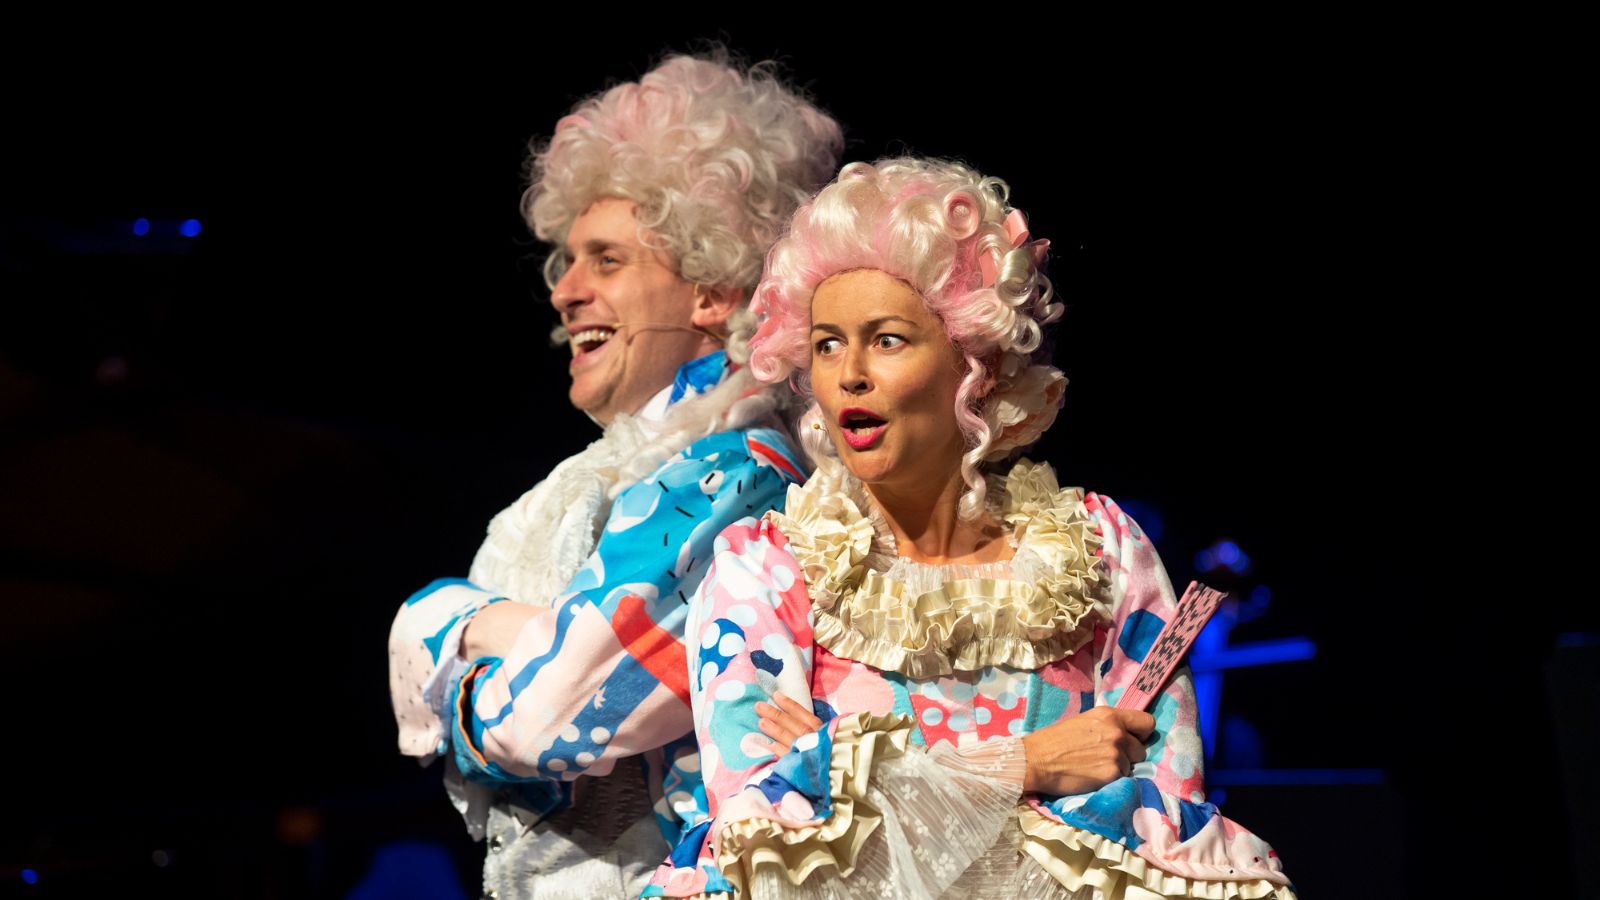 A man and woman dressed up as Mozart and his wife in colourful outfits and big white wigs